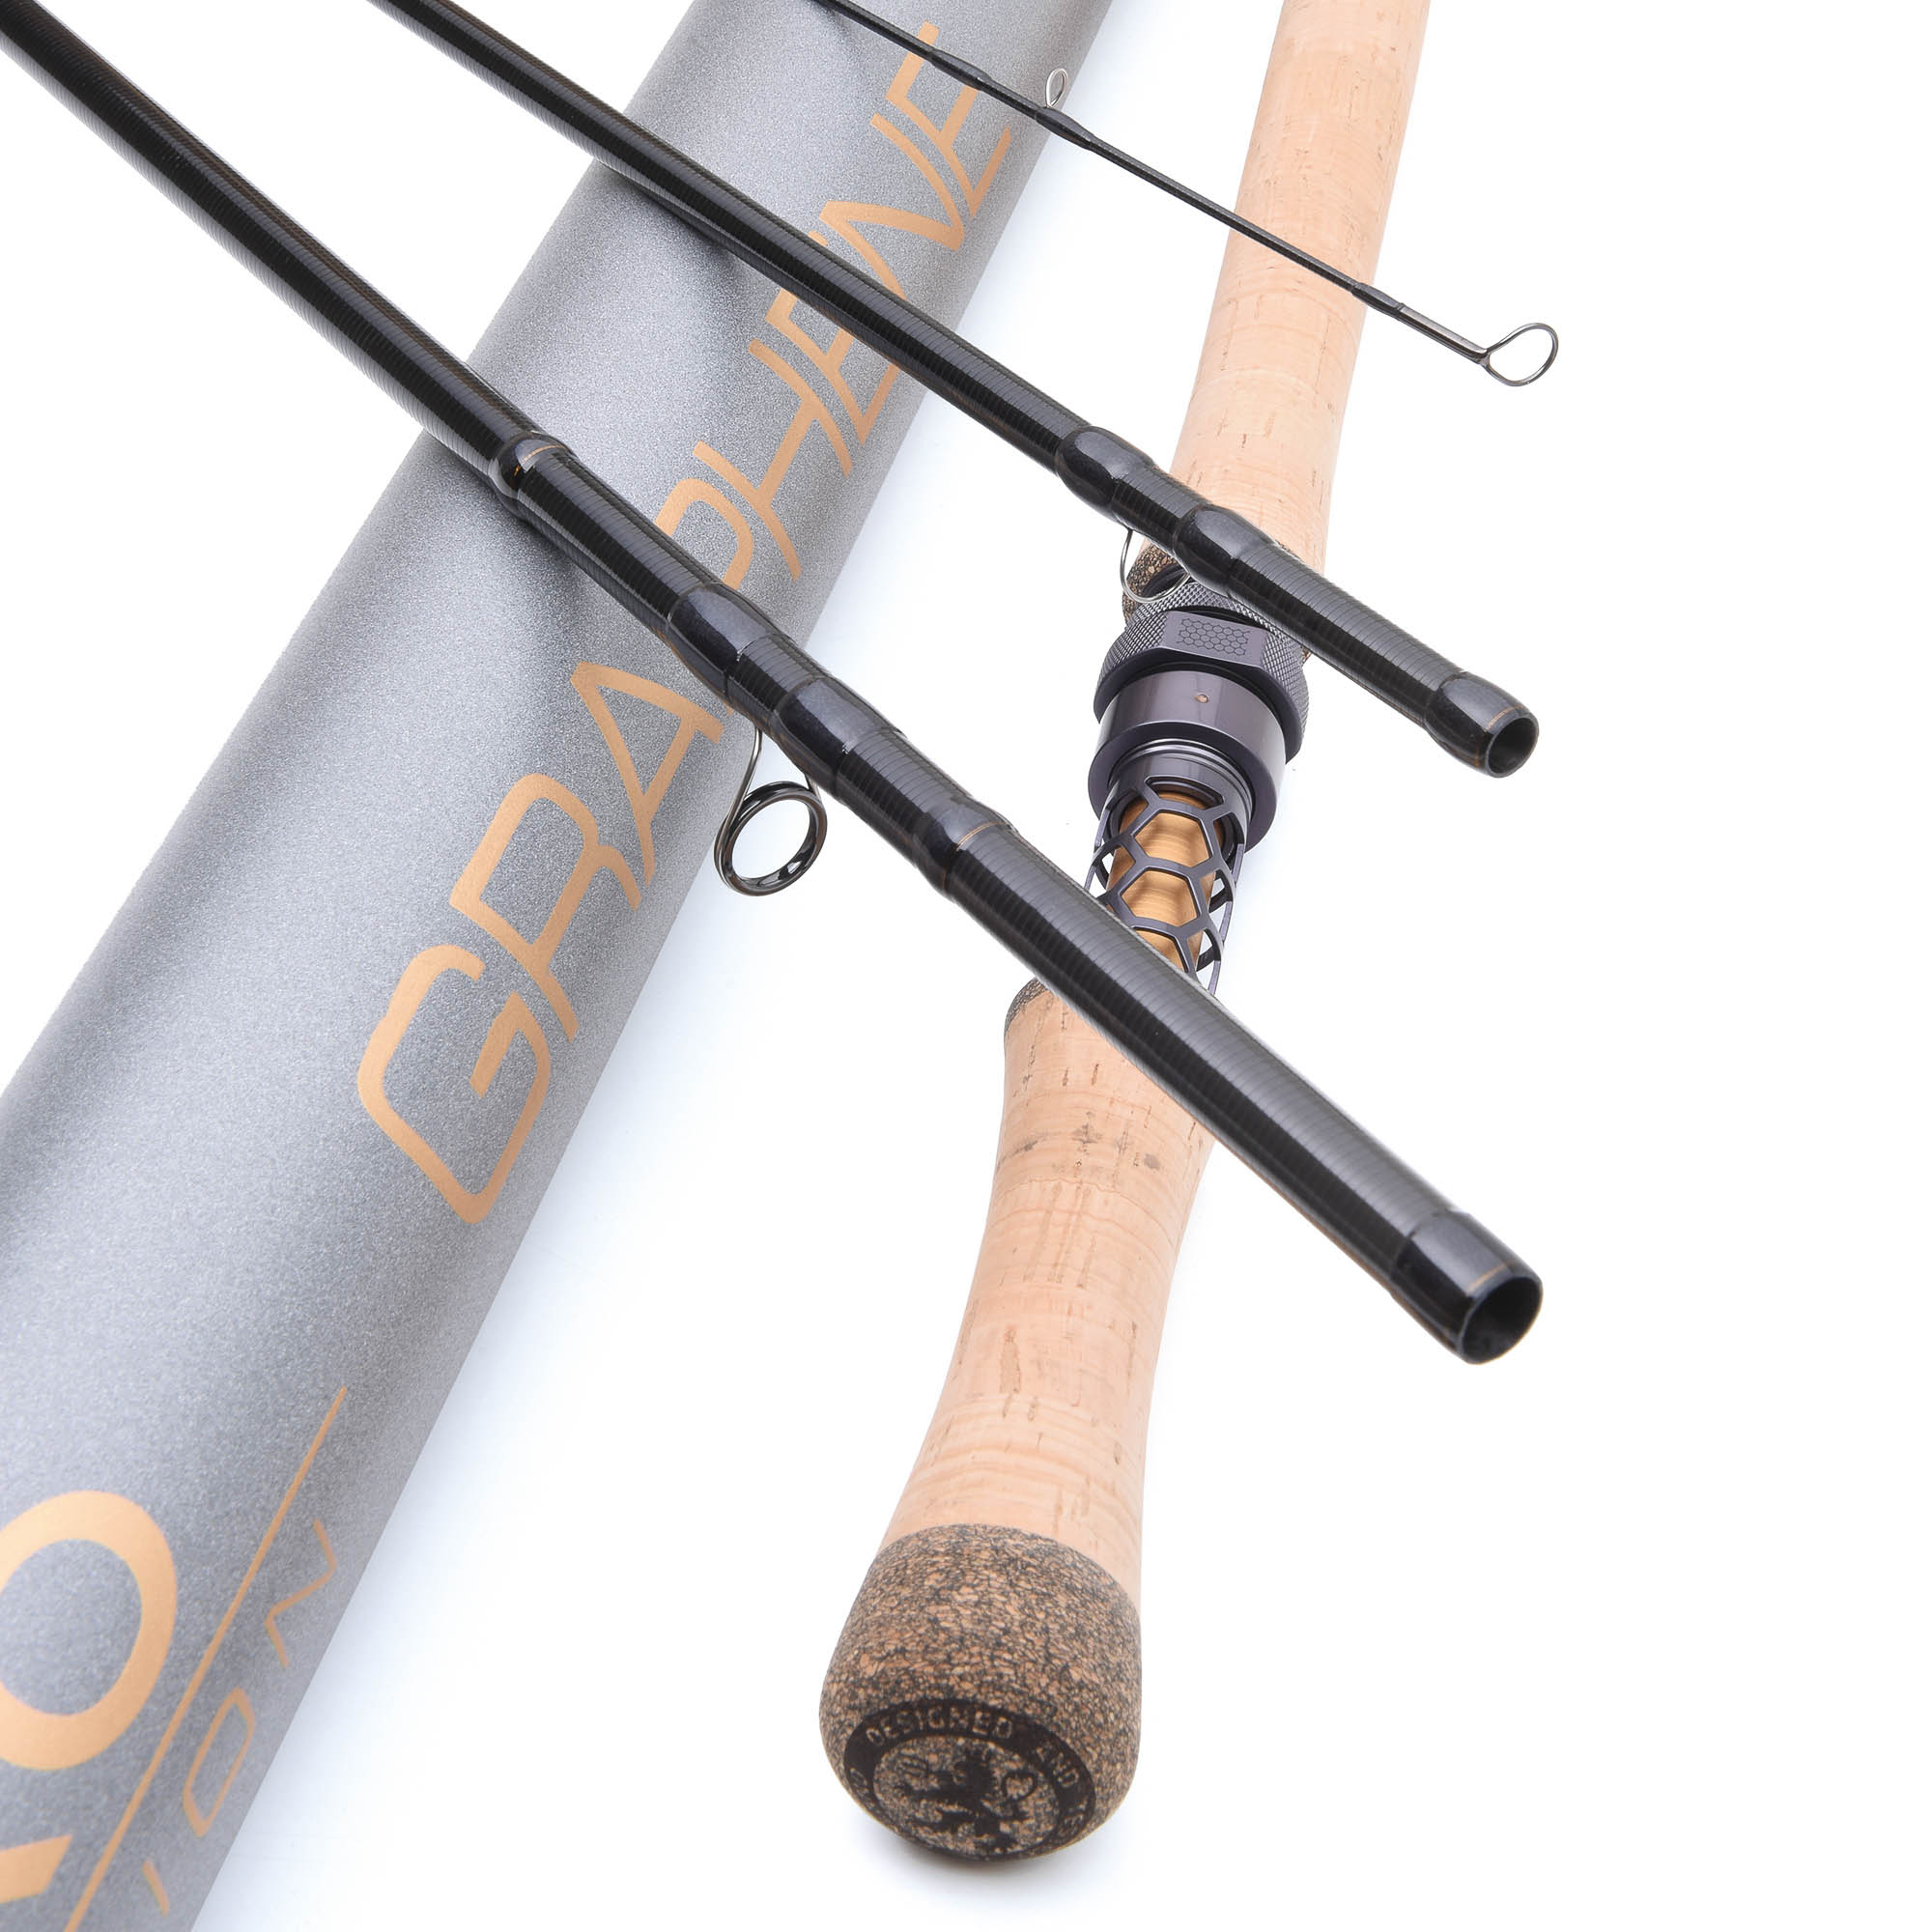 Vision Xo Graphene (Dh) Fly Rod 13 Foot 6'' #8 For Fly Fishing (Length 13ft 6in / 4.11m)